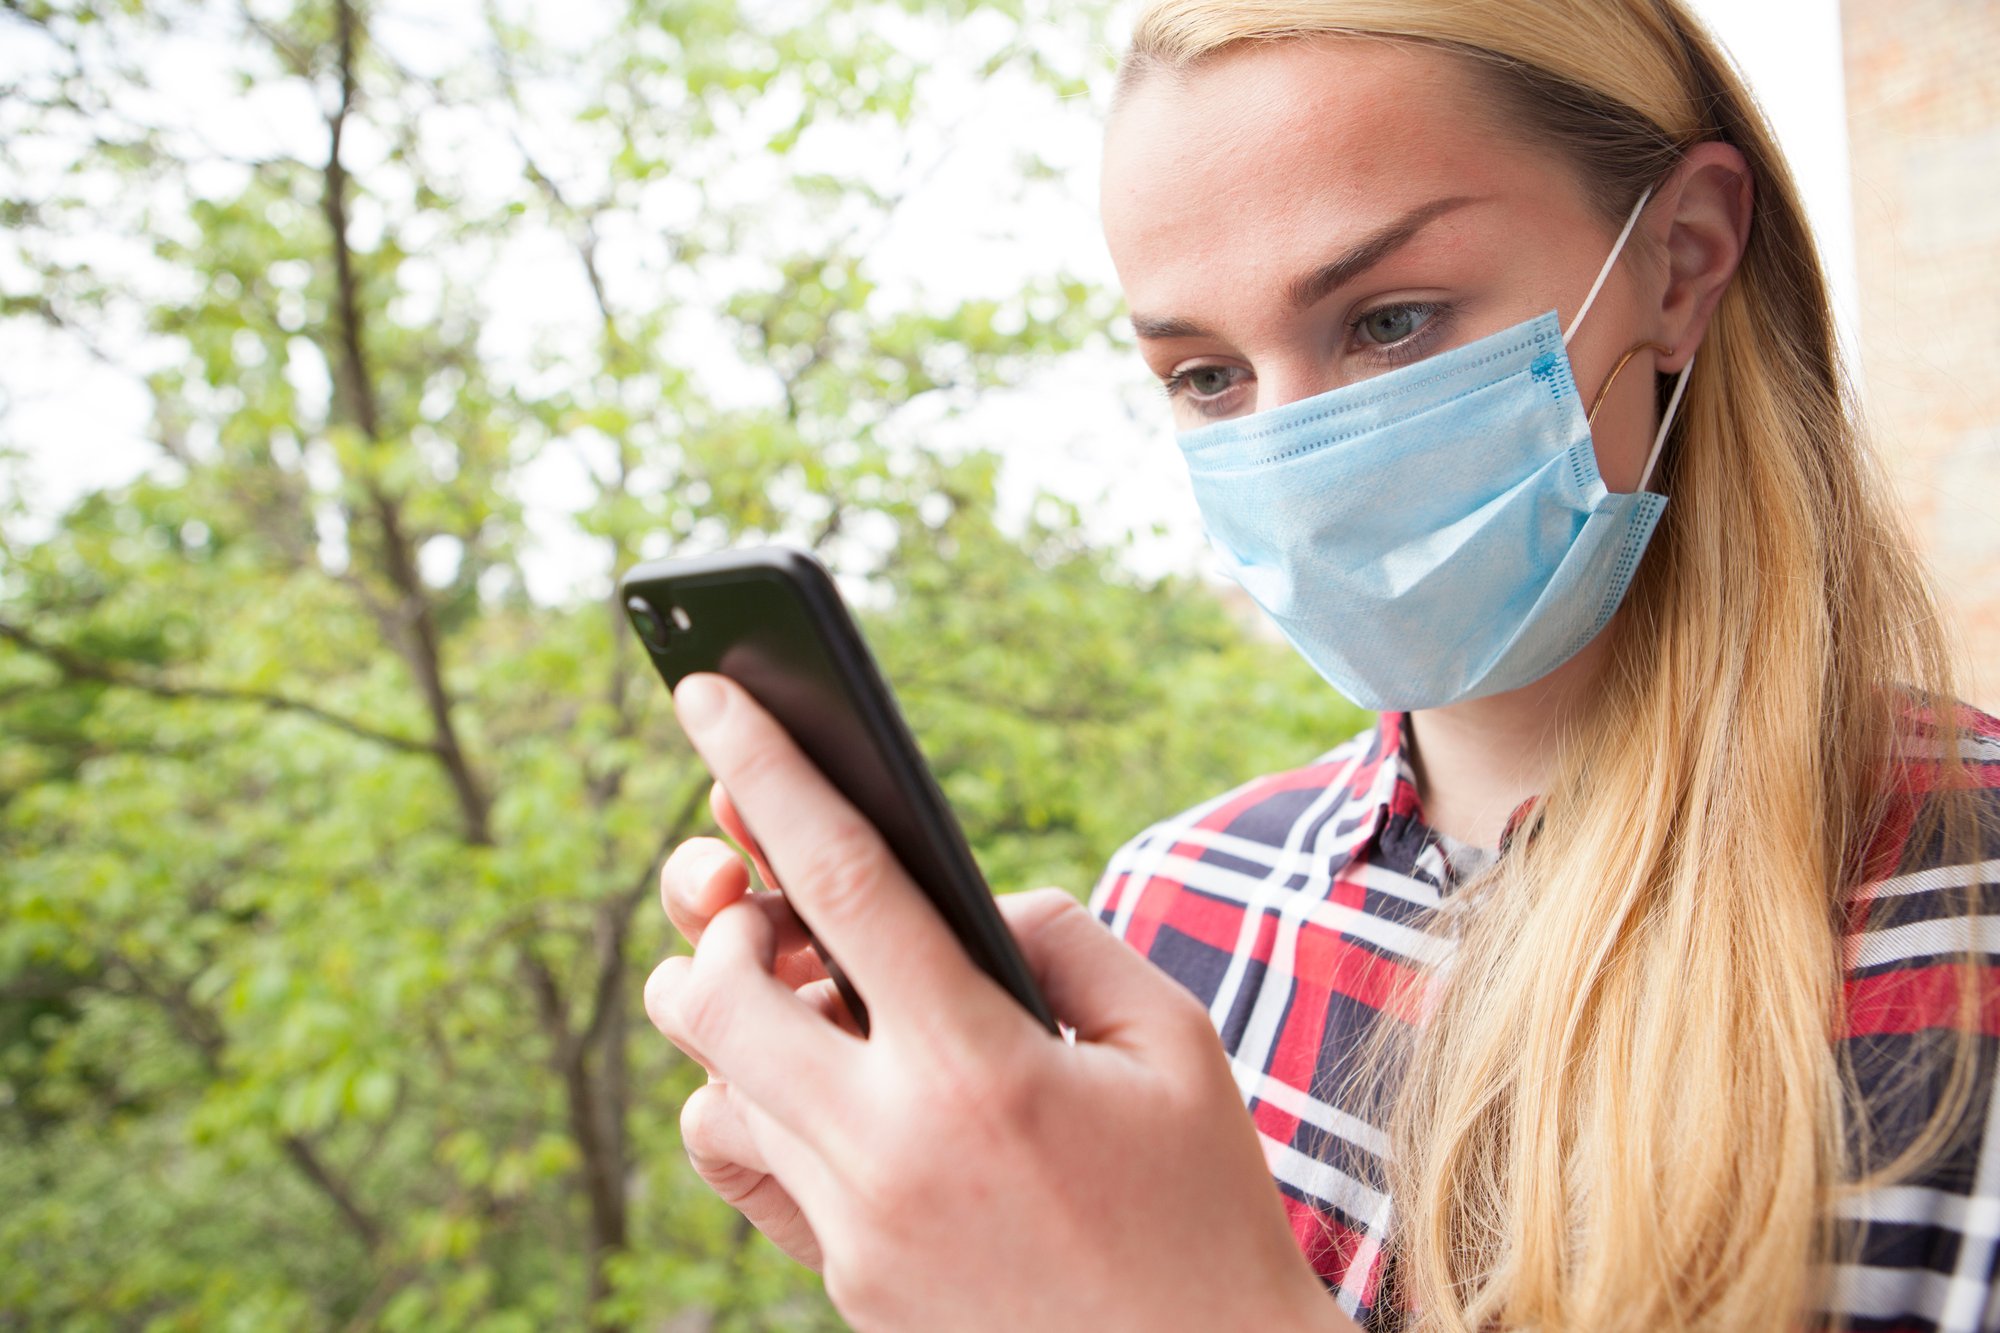 Young woman wearing medical mask outdoors, using her smart phone